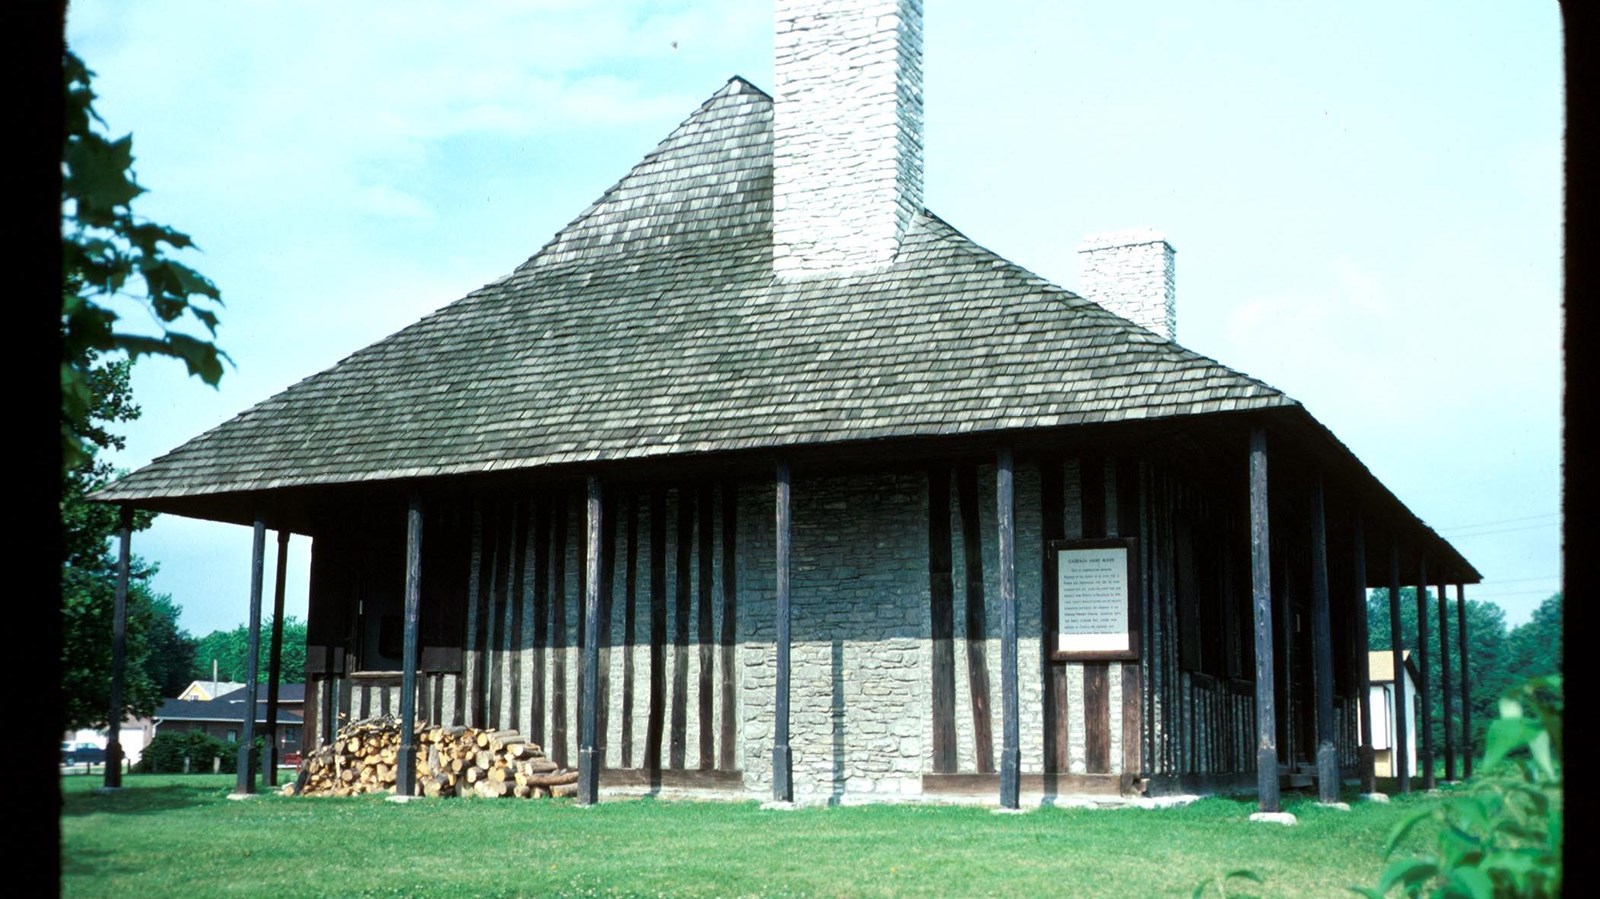 Stone building with wood-shingled roof overhanging a porch and tall stone chimney. 